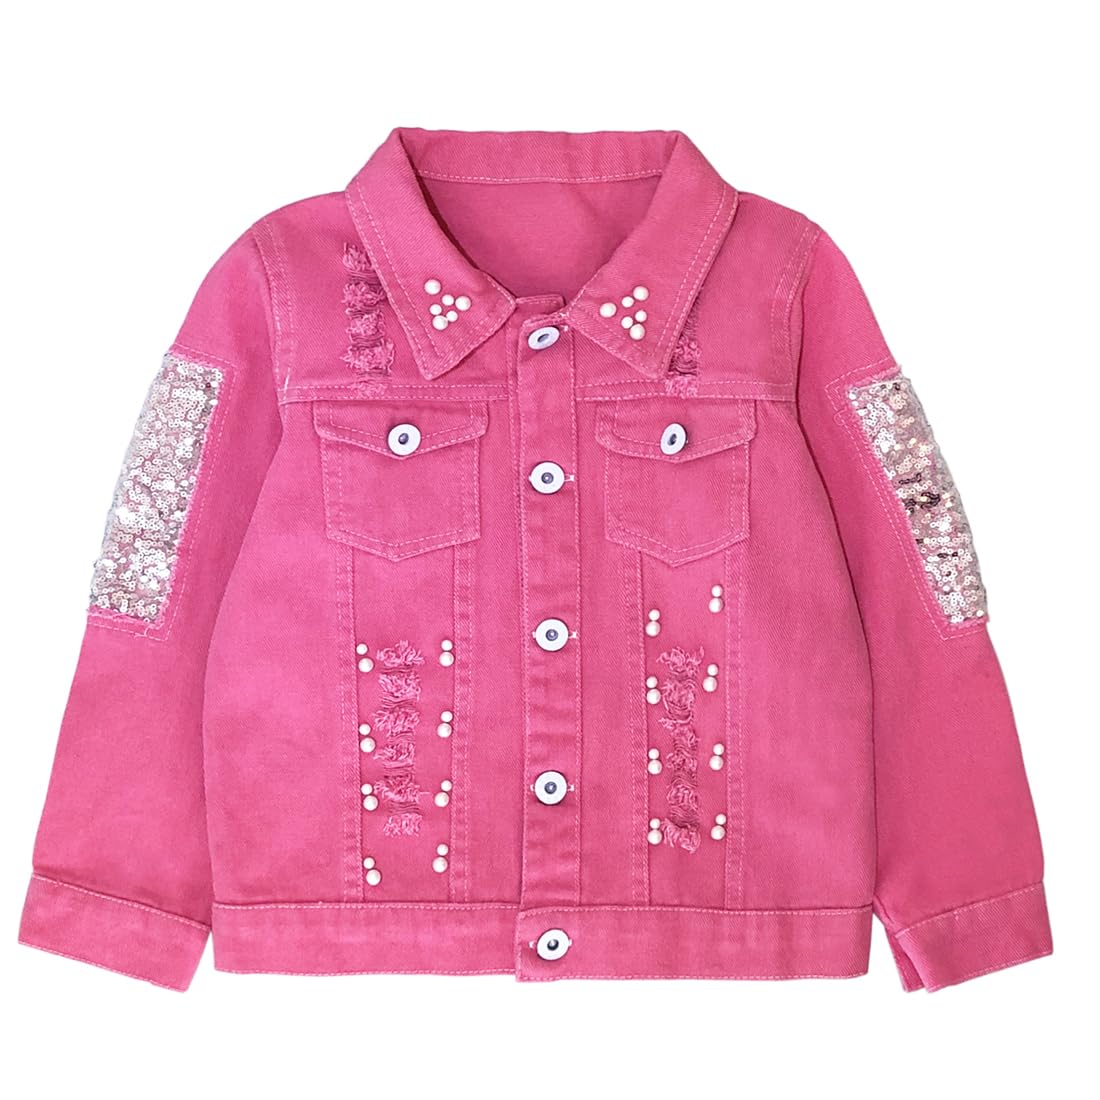 Peacolate 3-7Years Little Big Girl Pink Denim Jacket Butterfly Sequins Outwear